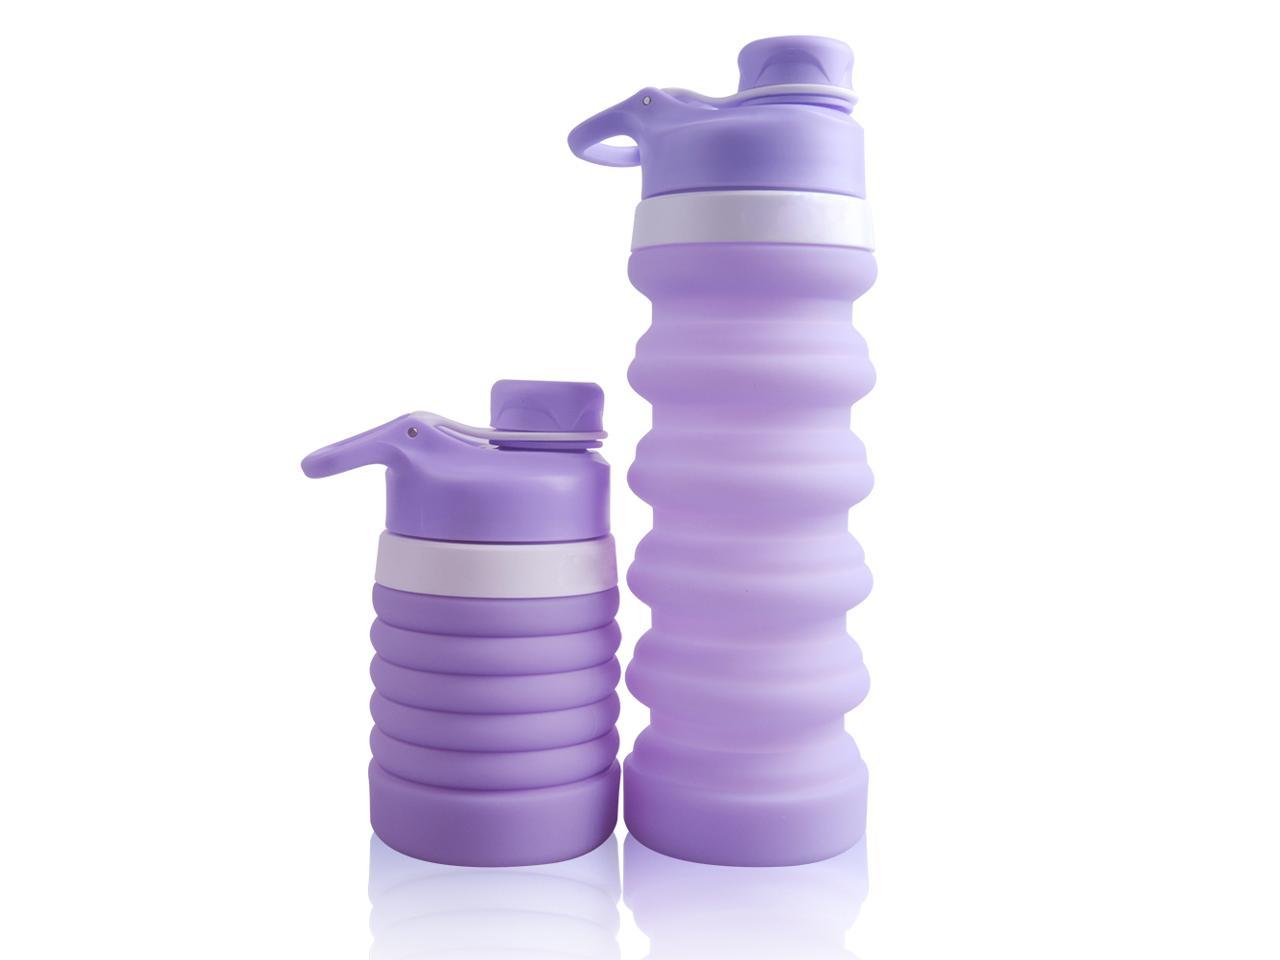 collapsible water bottle camping